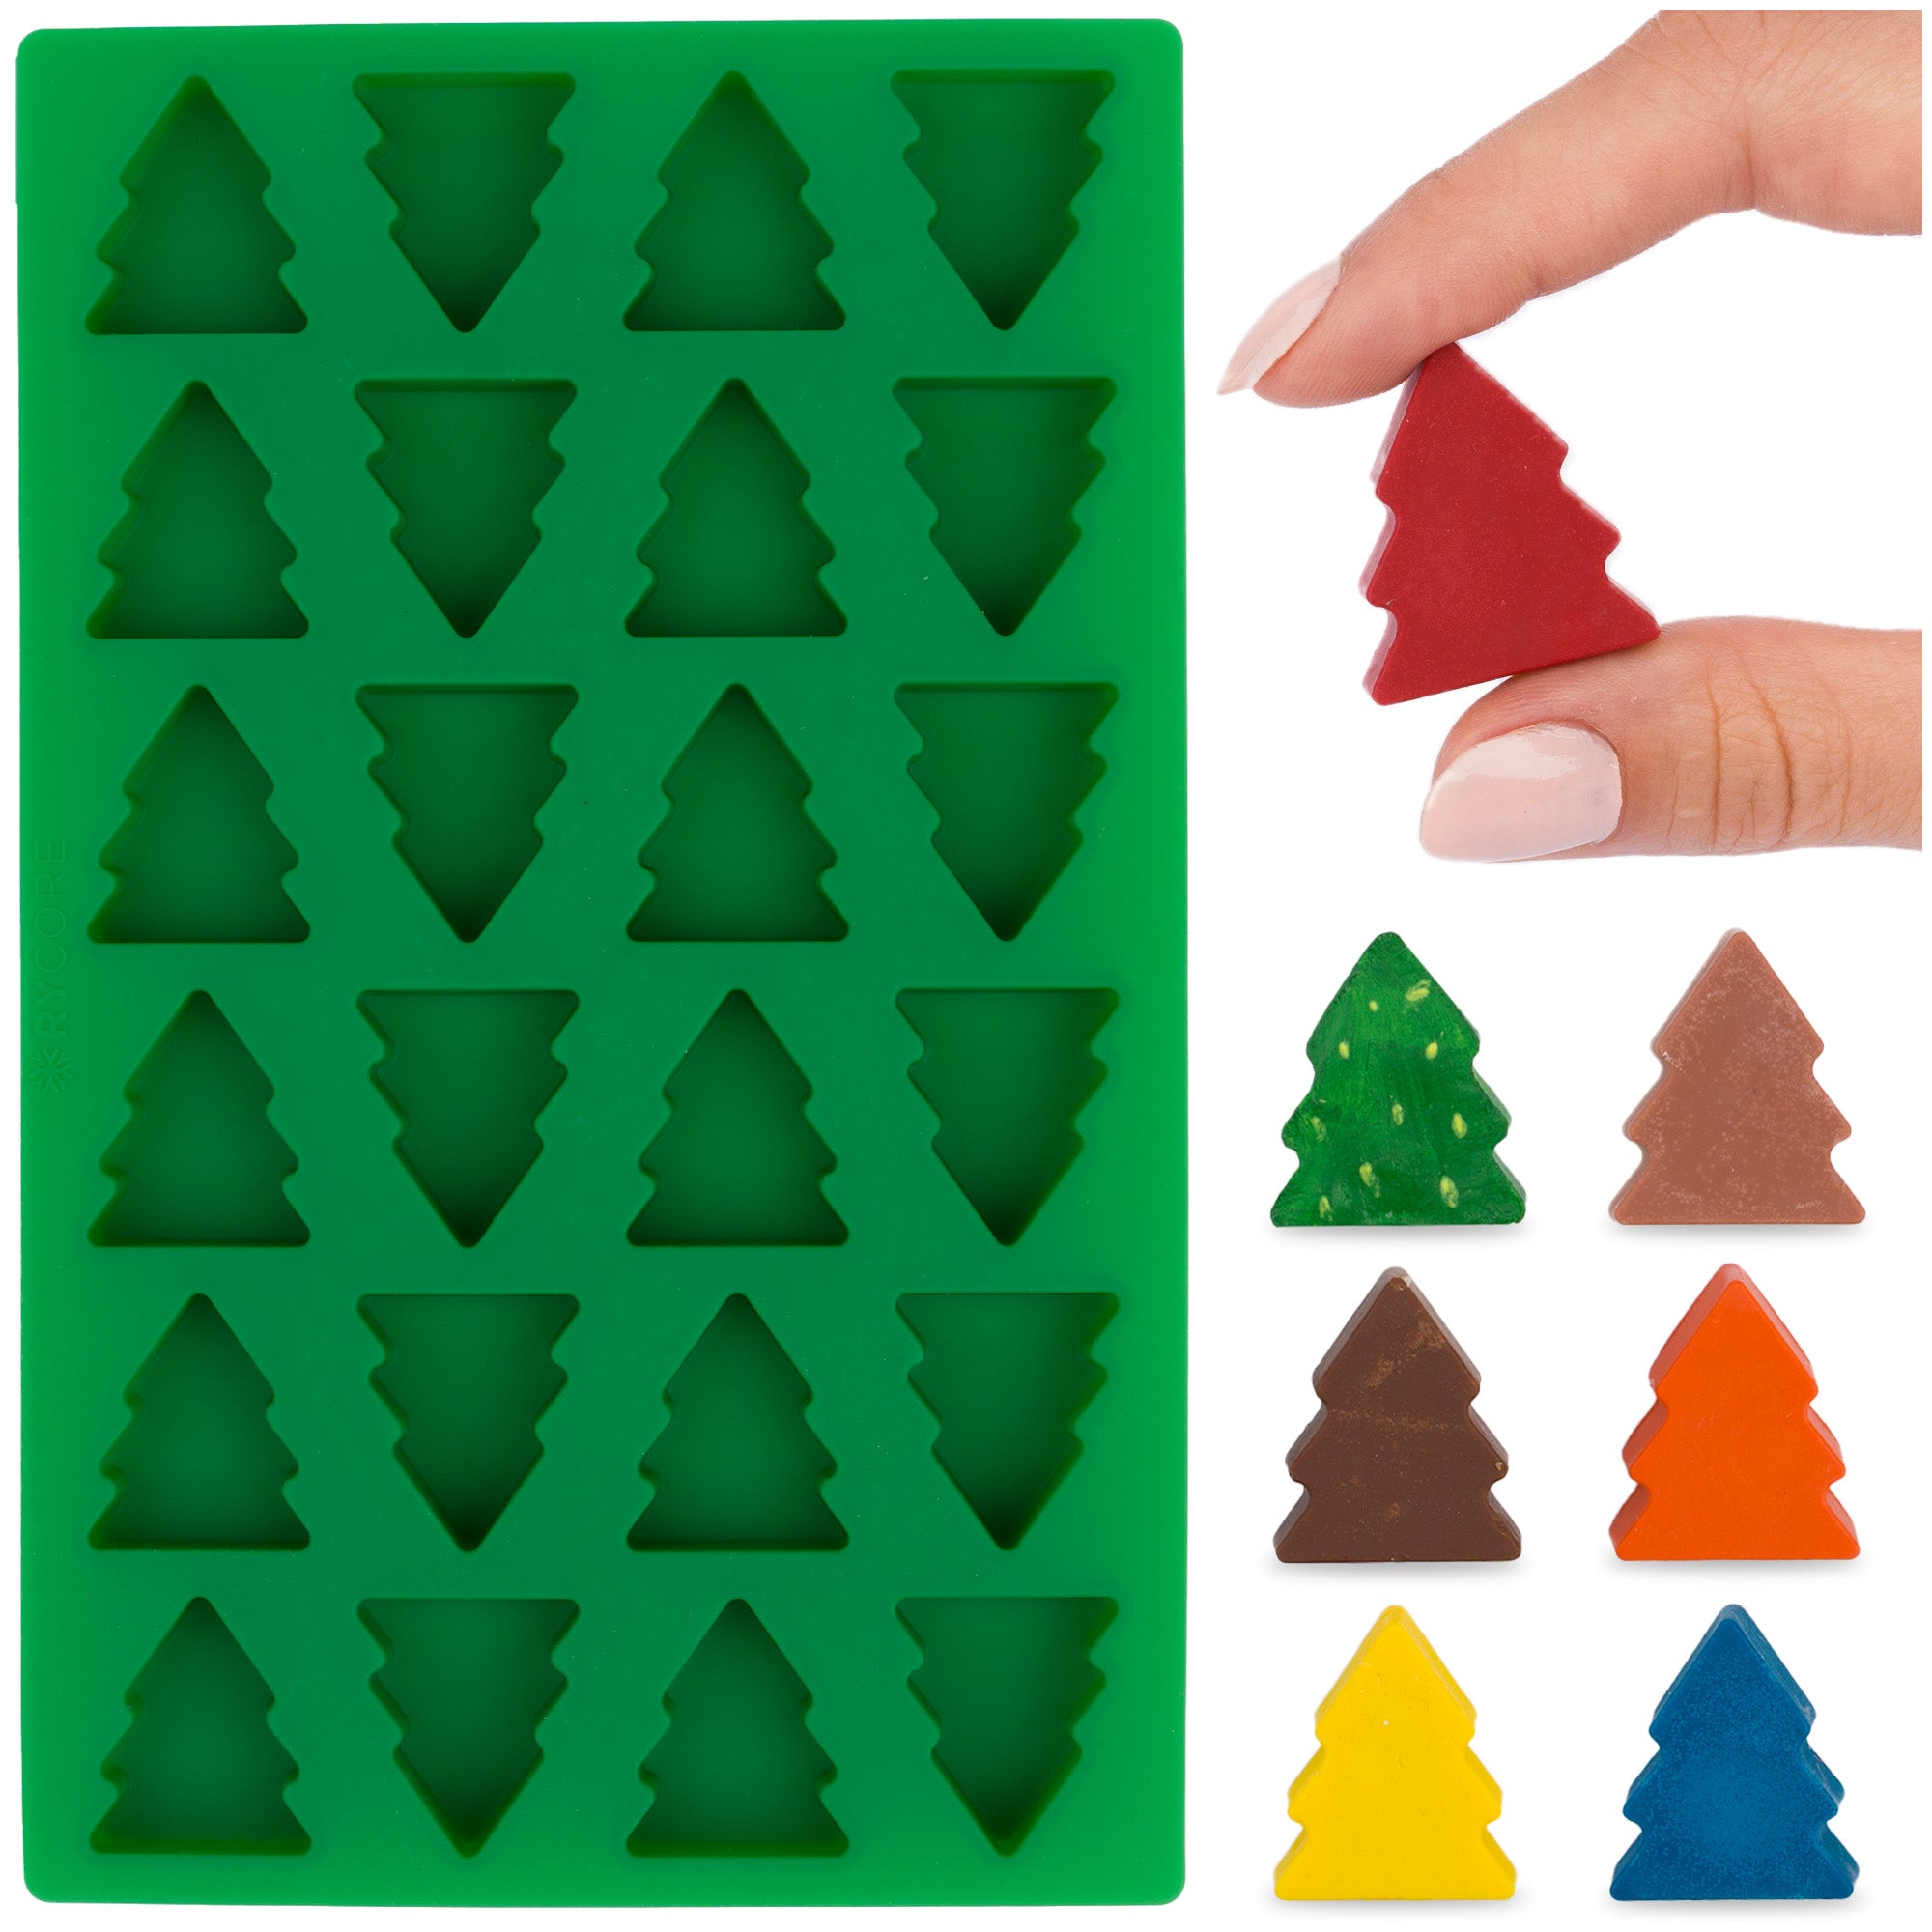 Mini Christmas Tree Silicone Mold for Festive Desserts - Perfect for Chocolates, Candies, Jellies, and Baking Treats - Christmas Tree Chocolate Mold and Baking Essential | Christmas Tree Ice Mold